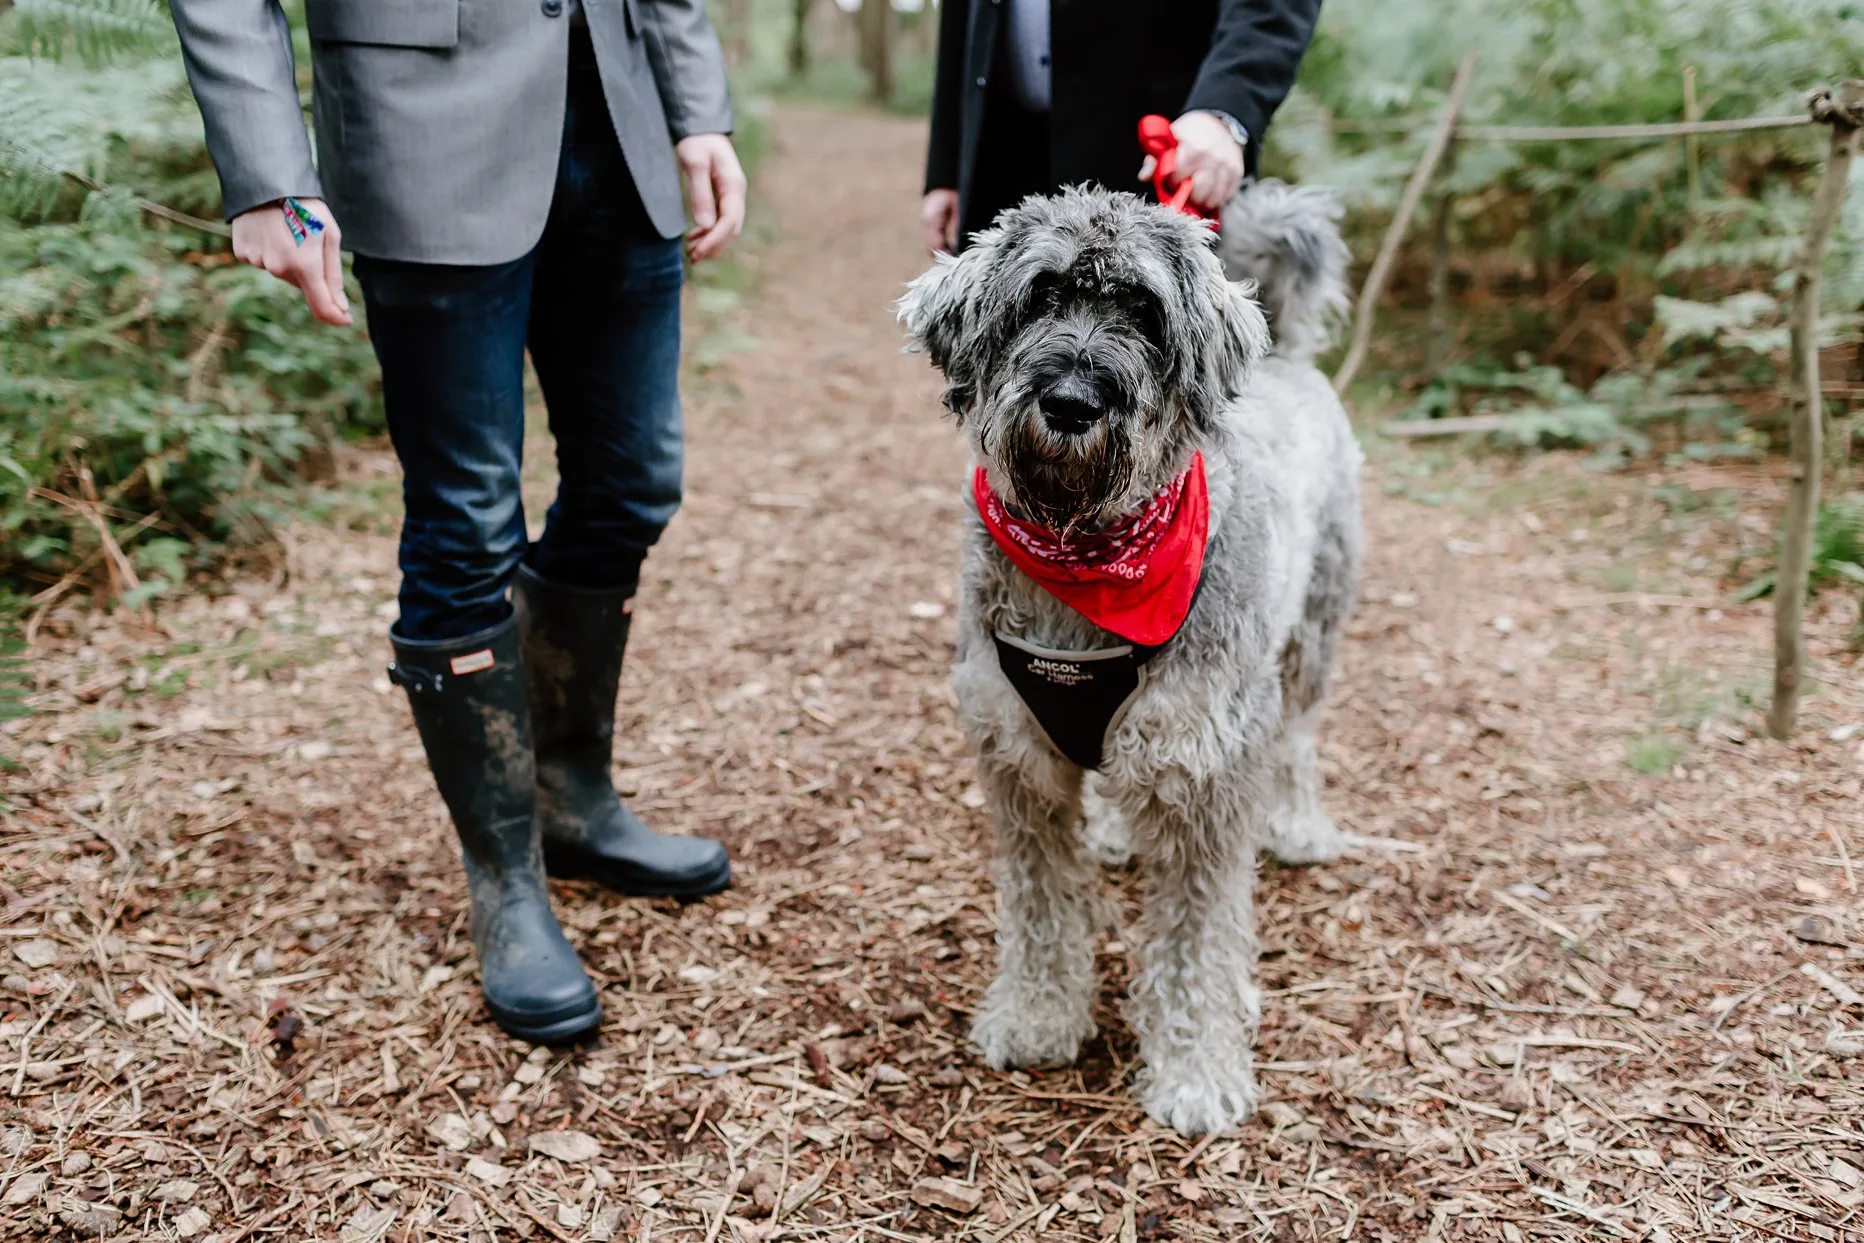 Large grey and black dog wearing a red neckerchief stood with wedding guests before an outdoor wedding at Camp Katur.